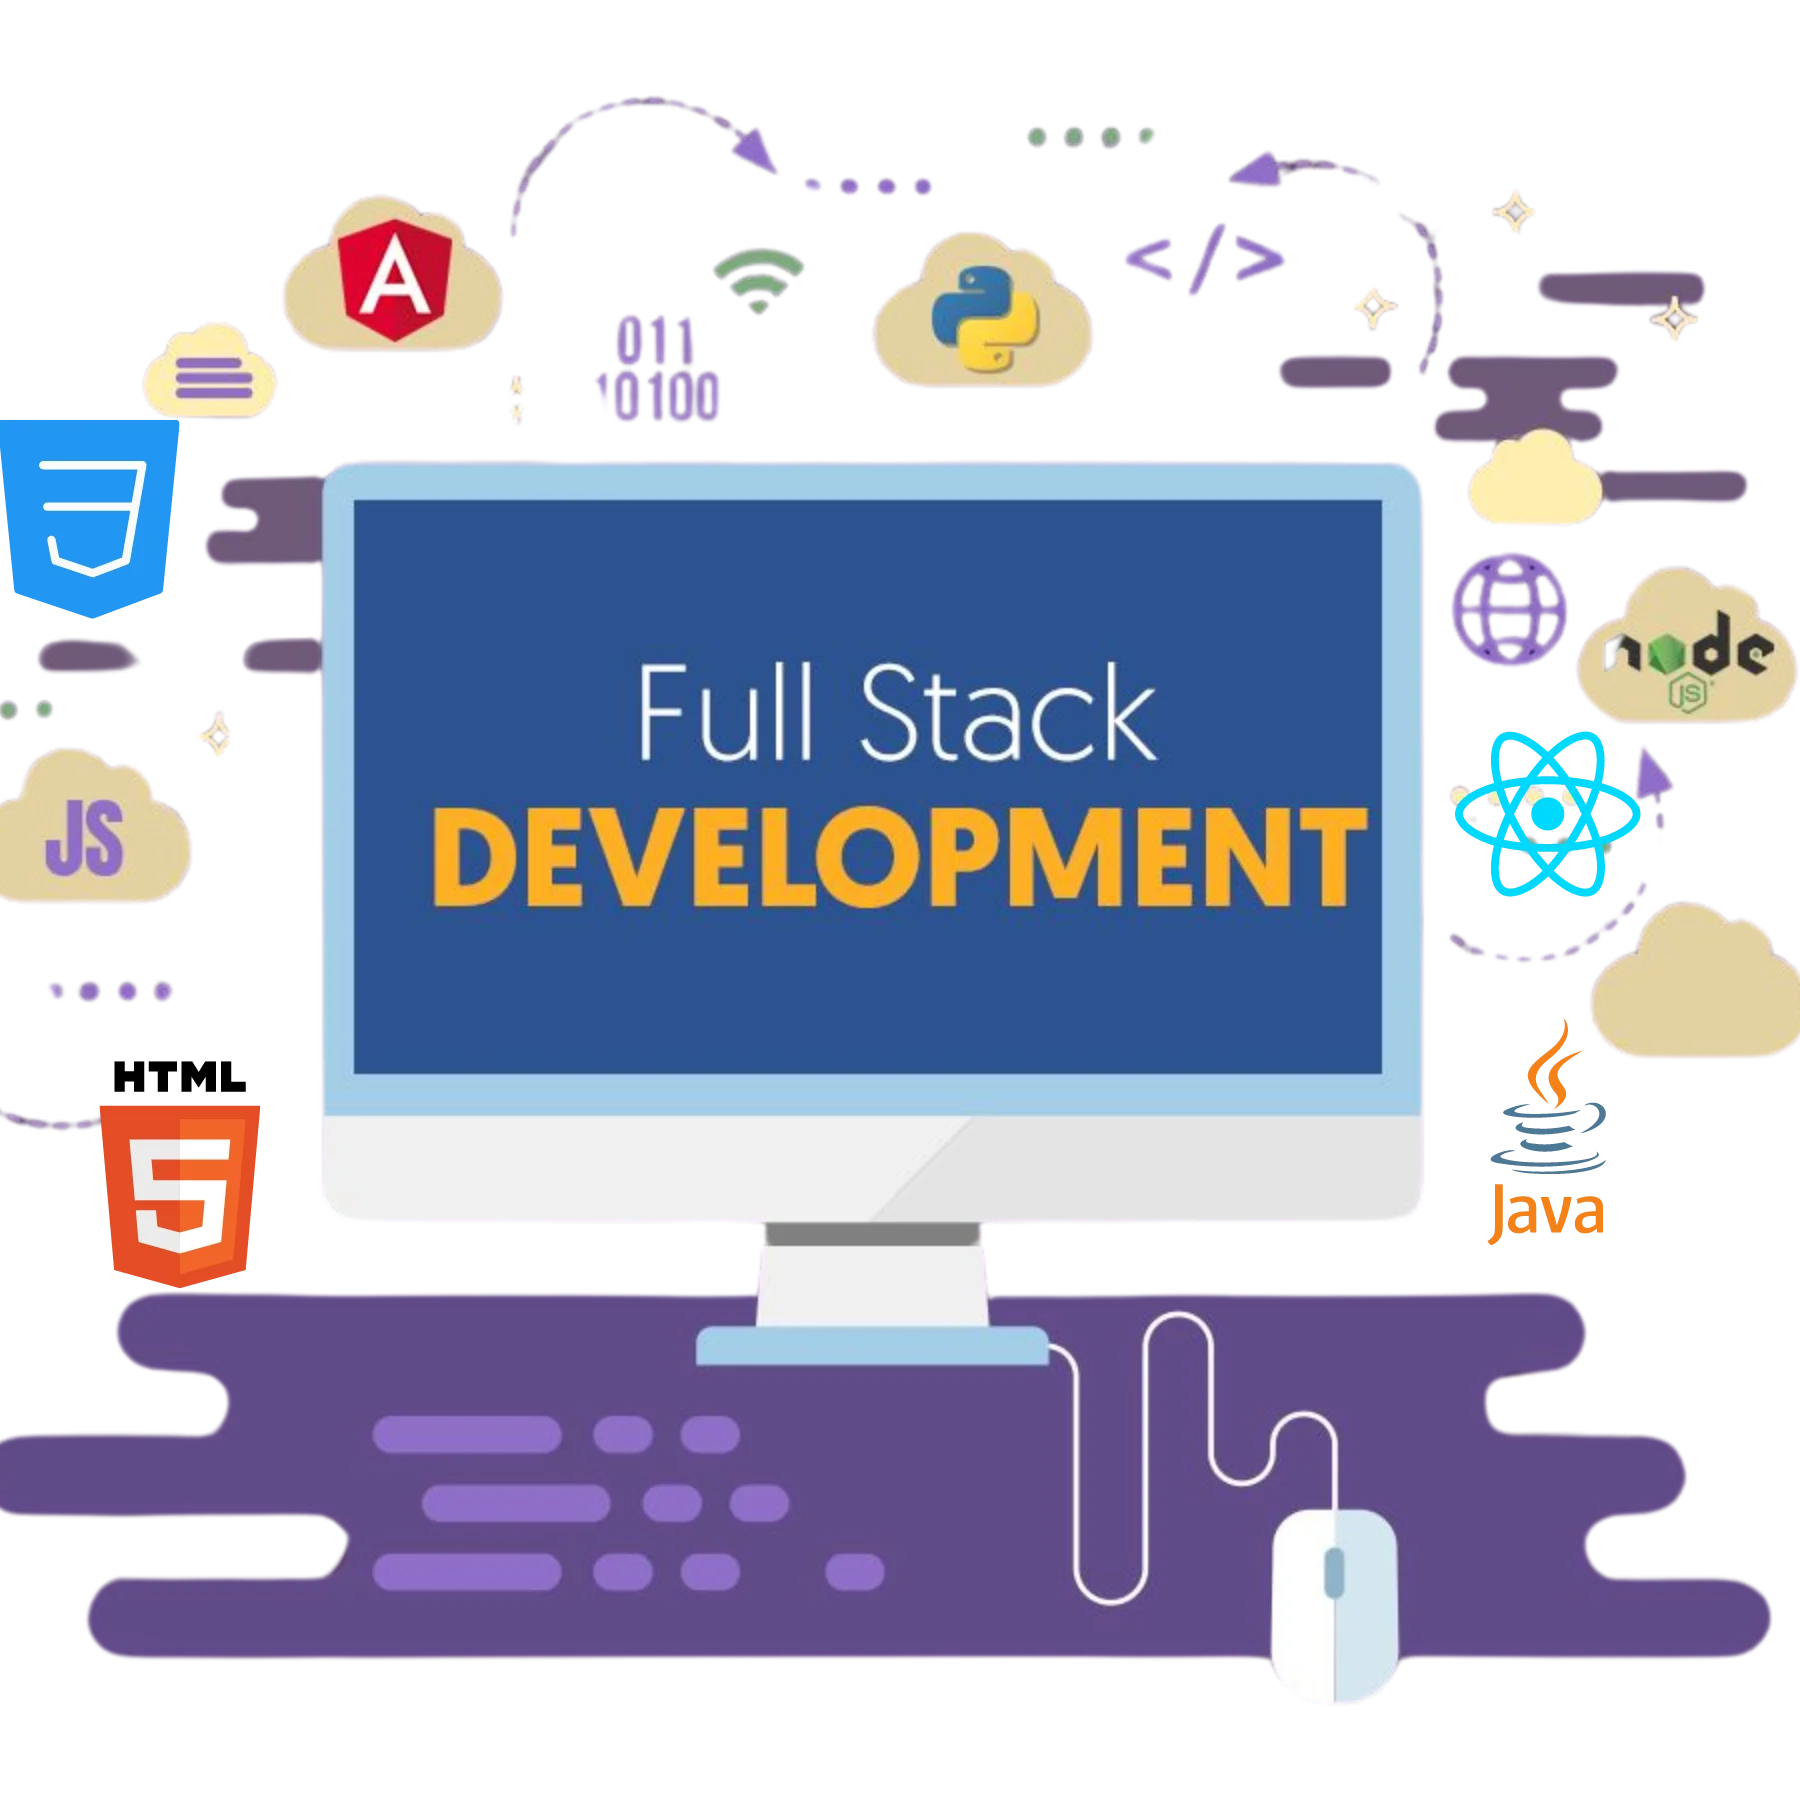 Empowering businesses with end-to-end digital solutions, our full stack development company crafts seamless experiences across web, mobile, and cloud platforms.